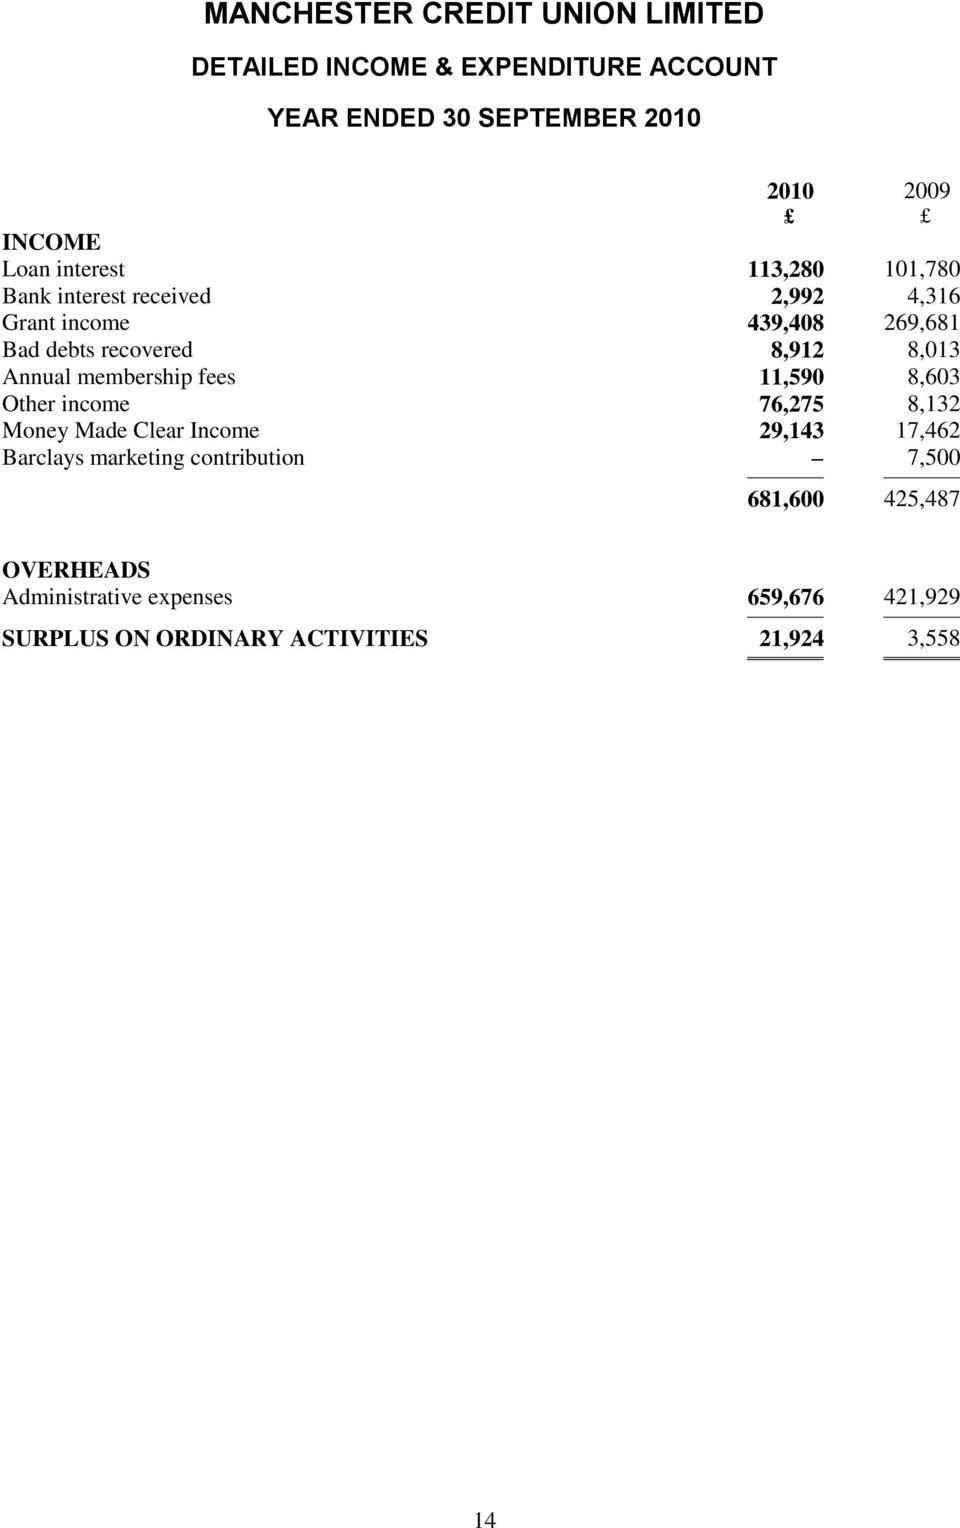 Other income 76,275 8,132 Money Made Clear Income 29,143 17,462 Barclays marketing contribution 7,500